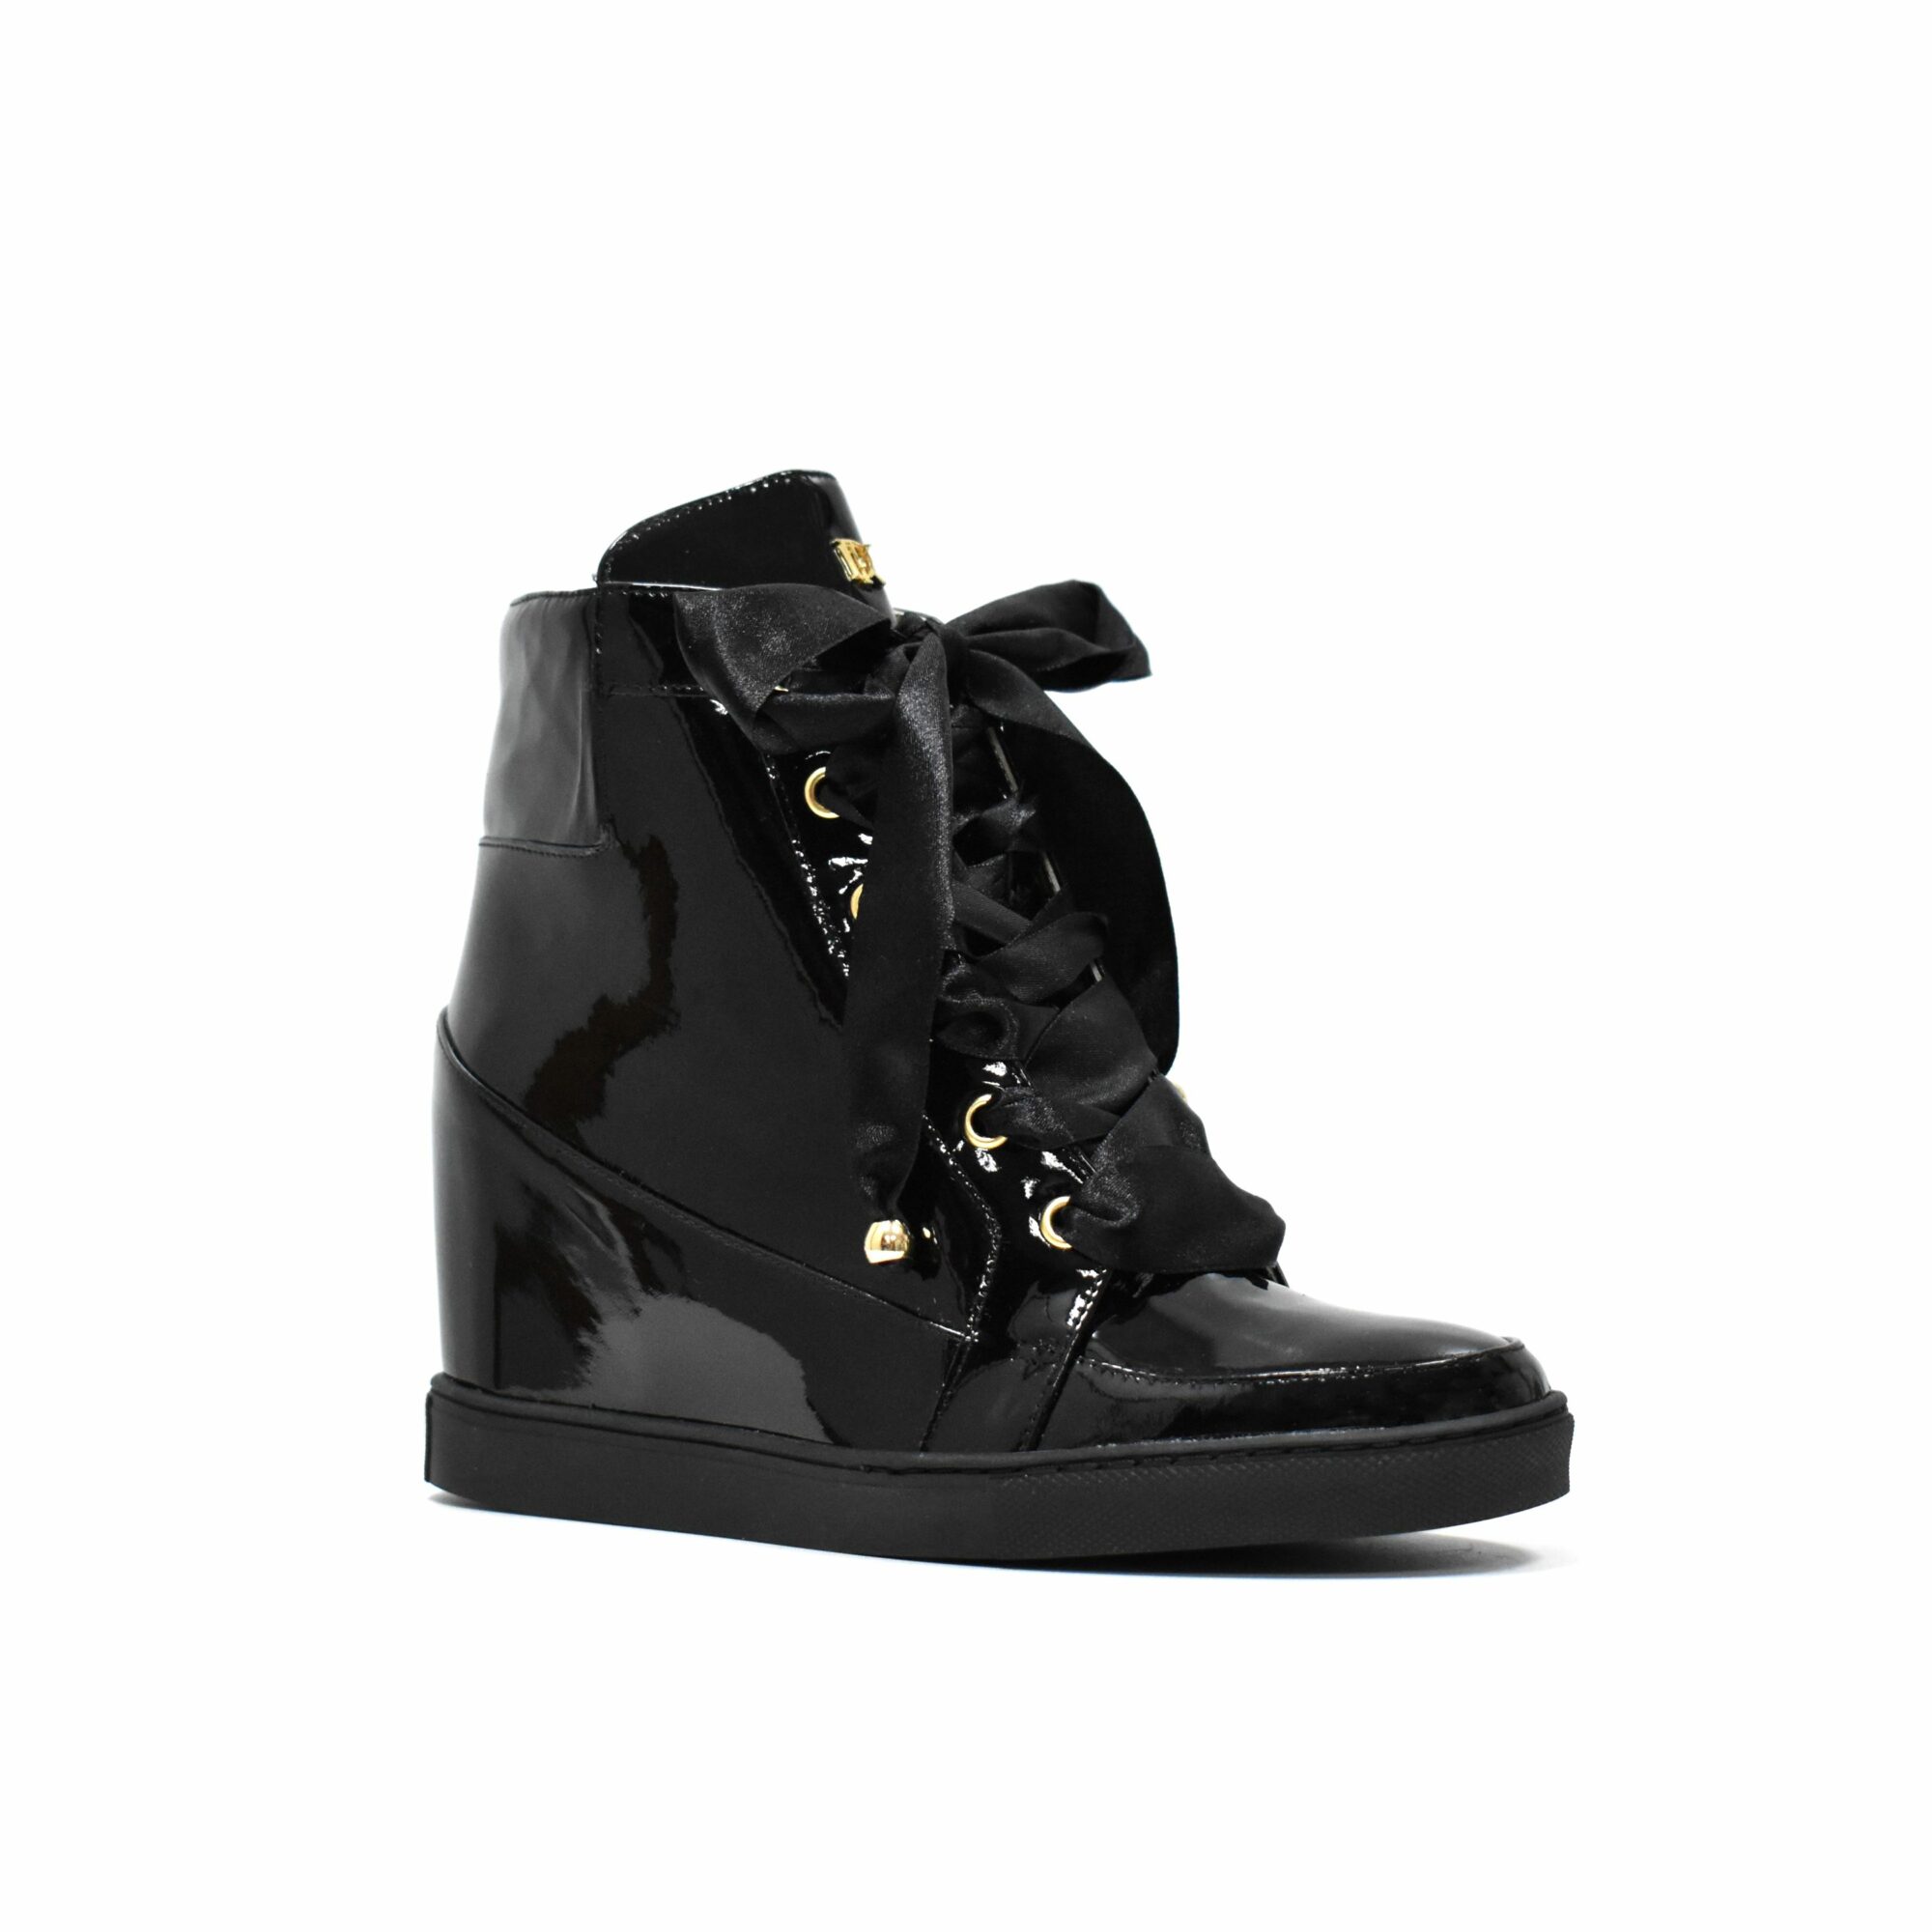 High sneakers Black Lacca